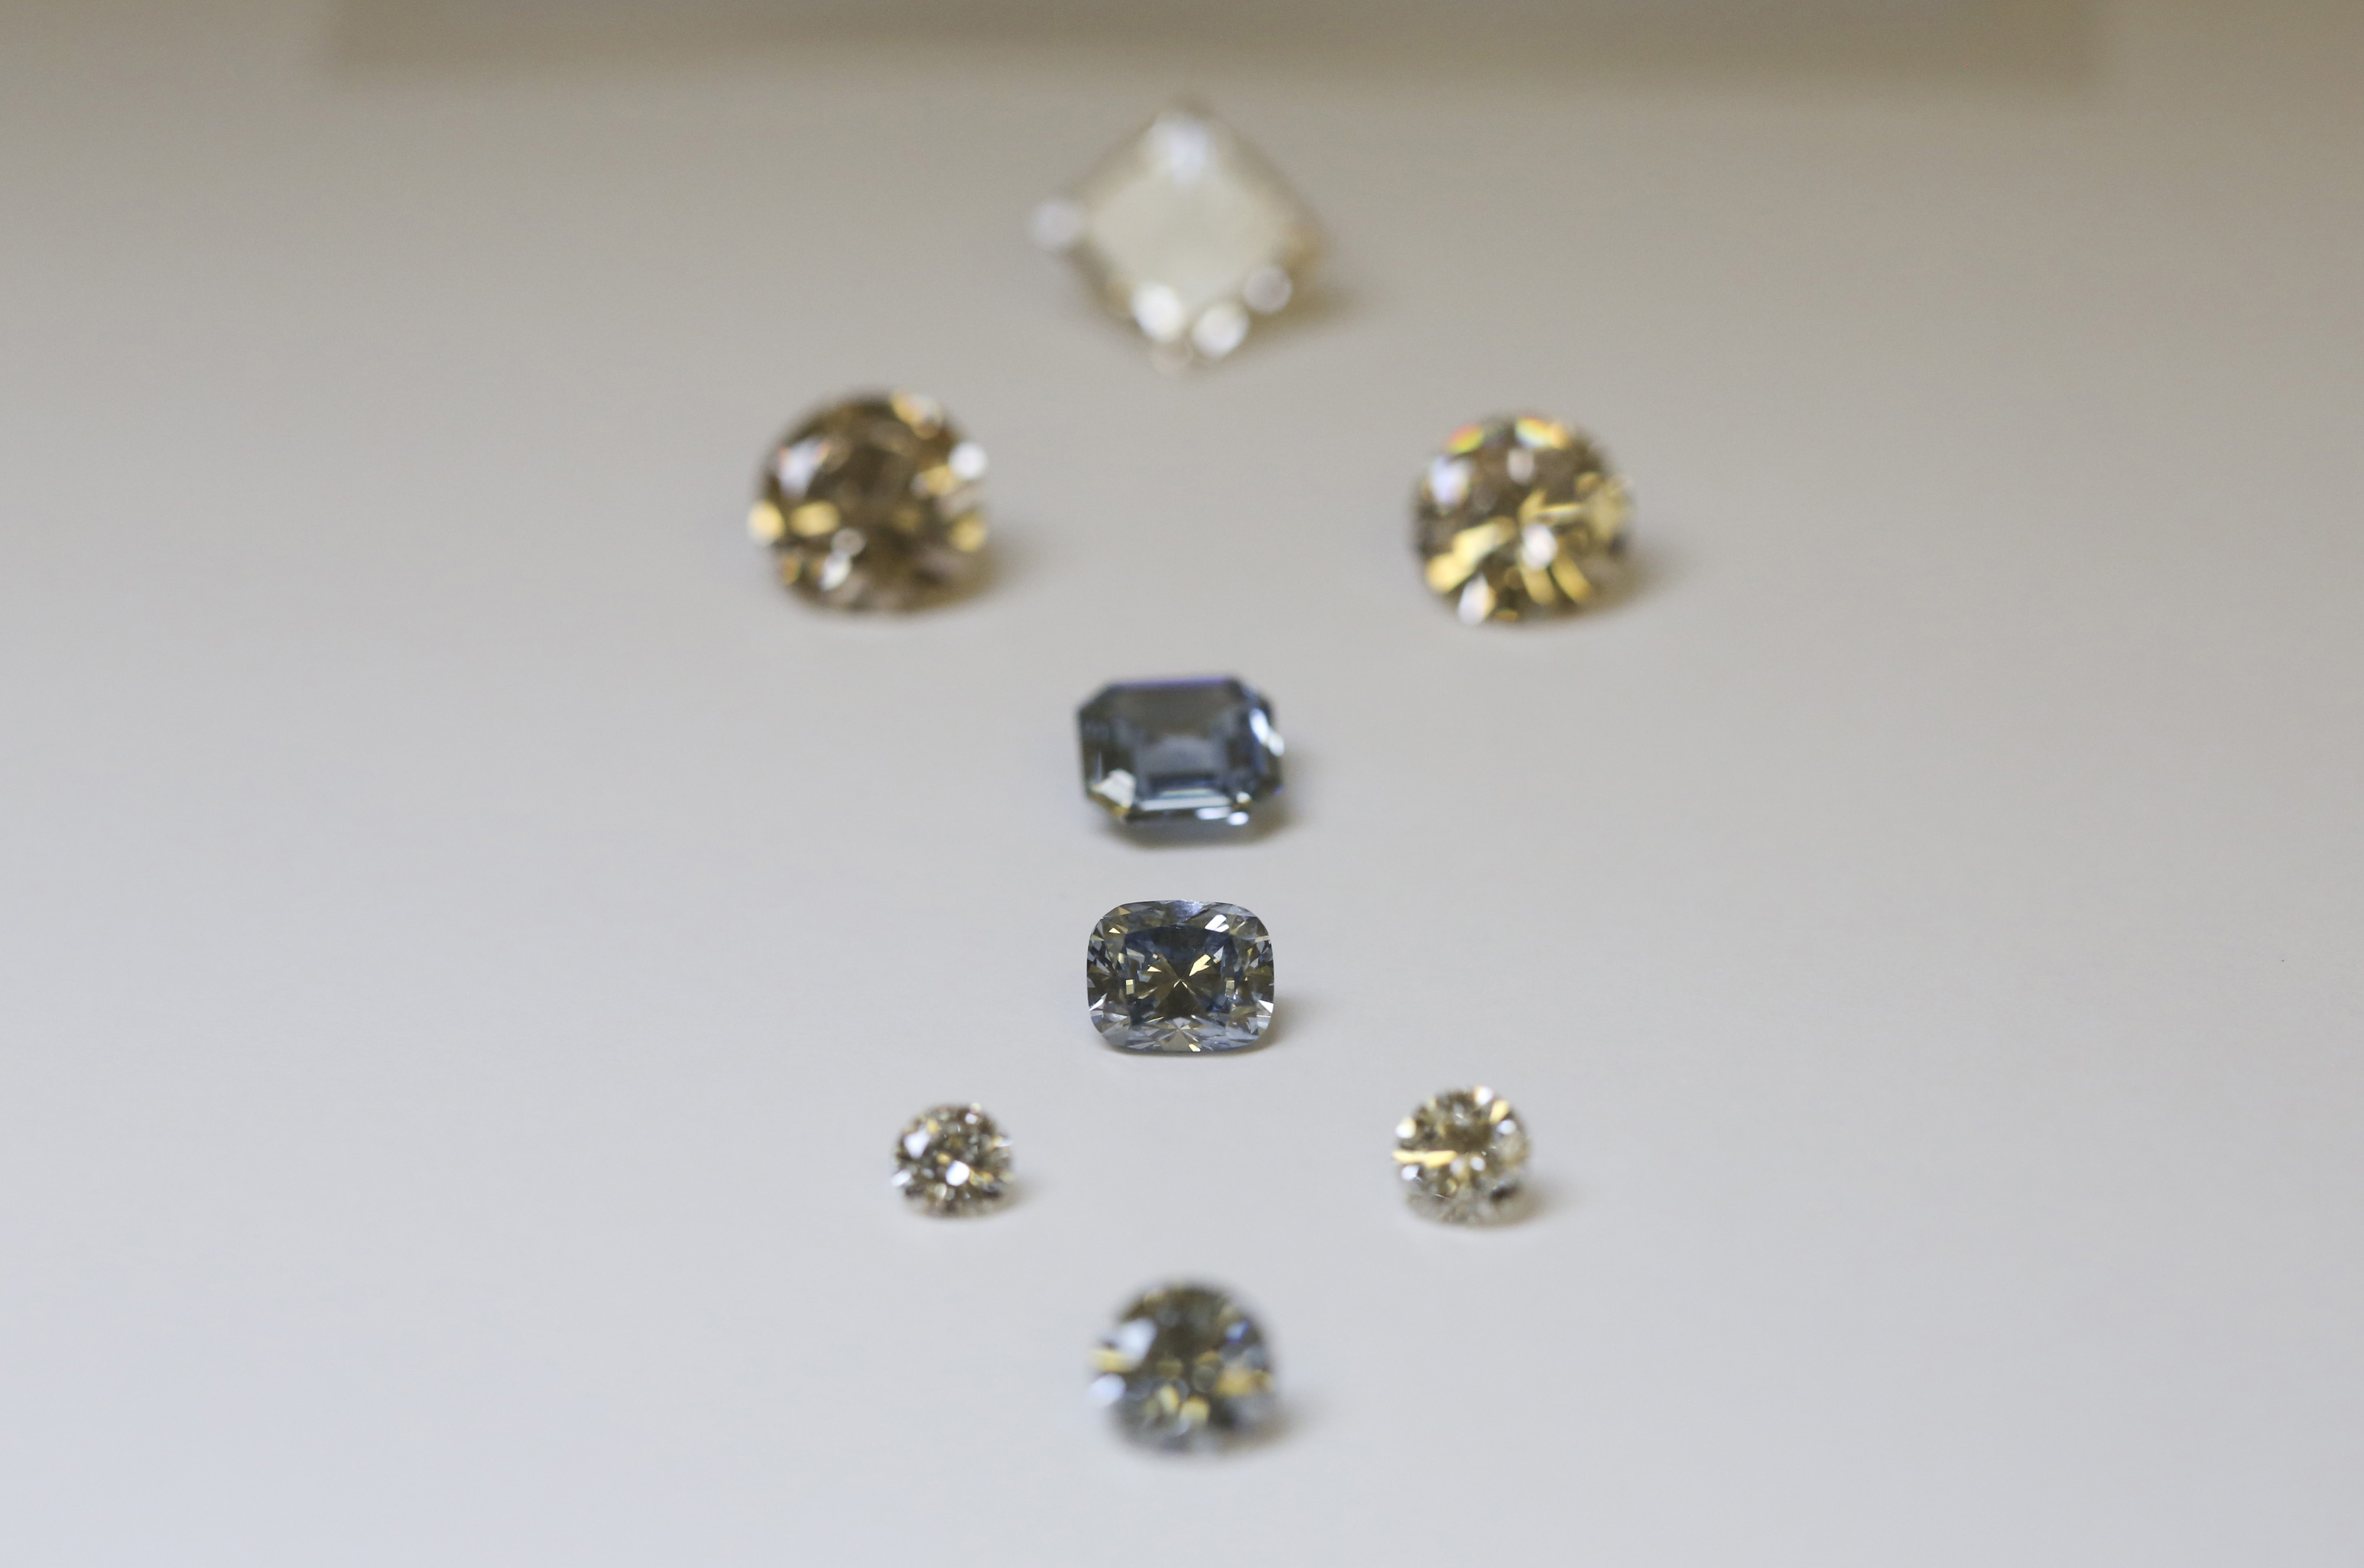 De Beers' foray into synthetic diamond jewelry seems a great deal